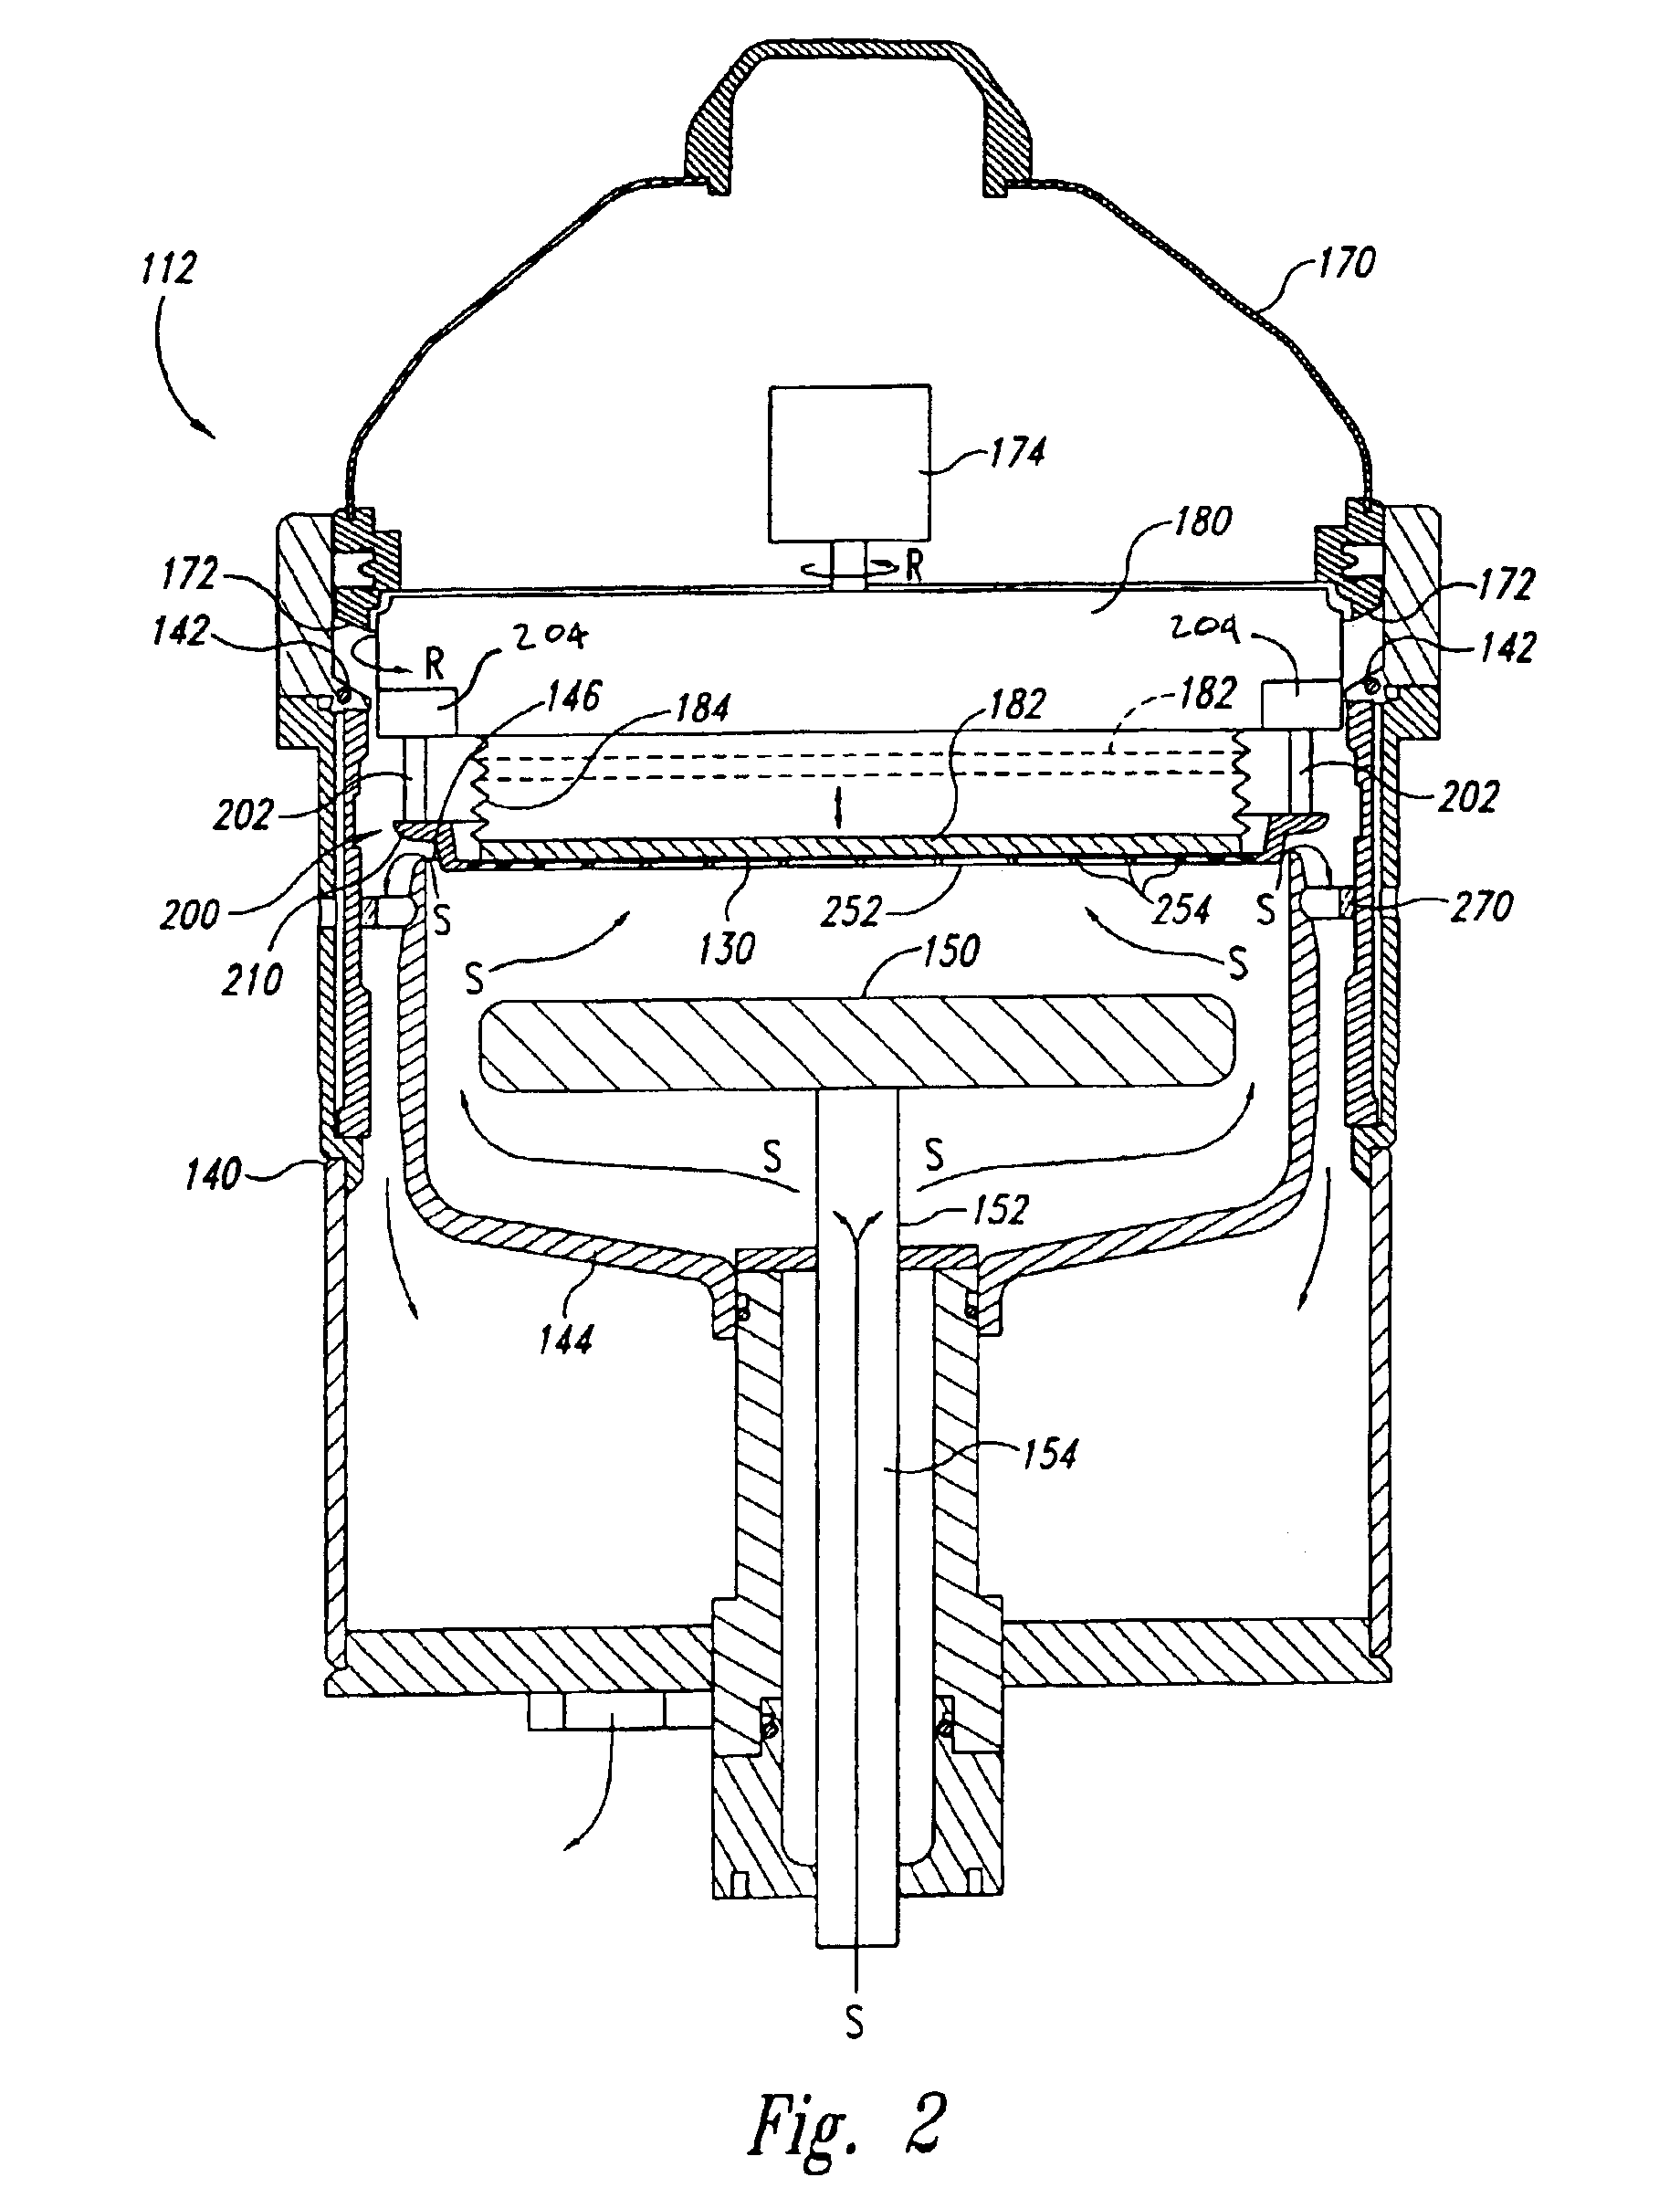 Contact assemblies, methods for making contact assemblies, and plating machines with contact assemblies for plating microelectronic workpieces